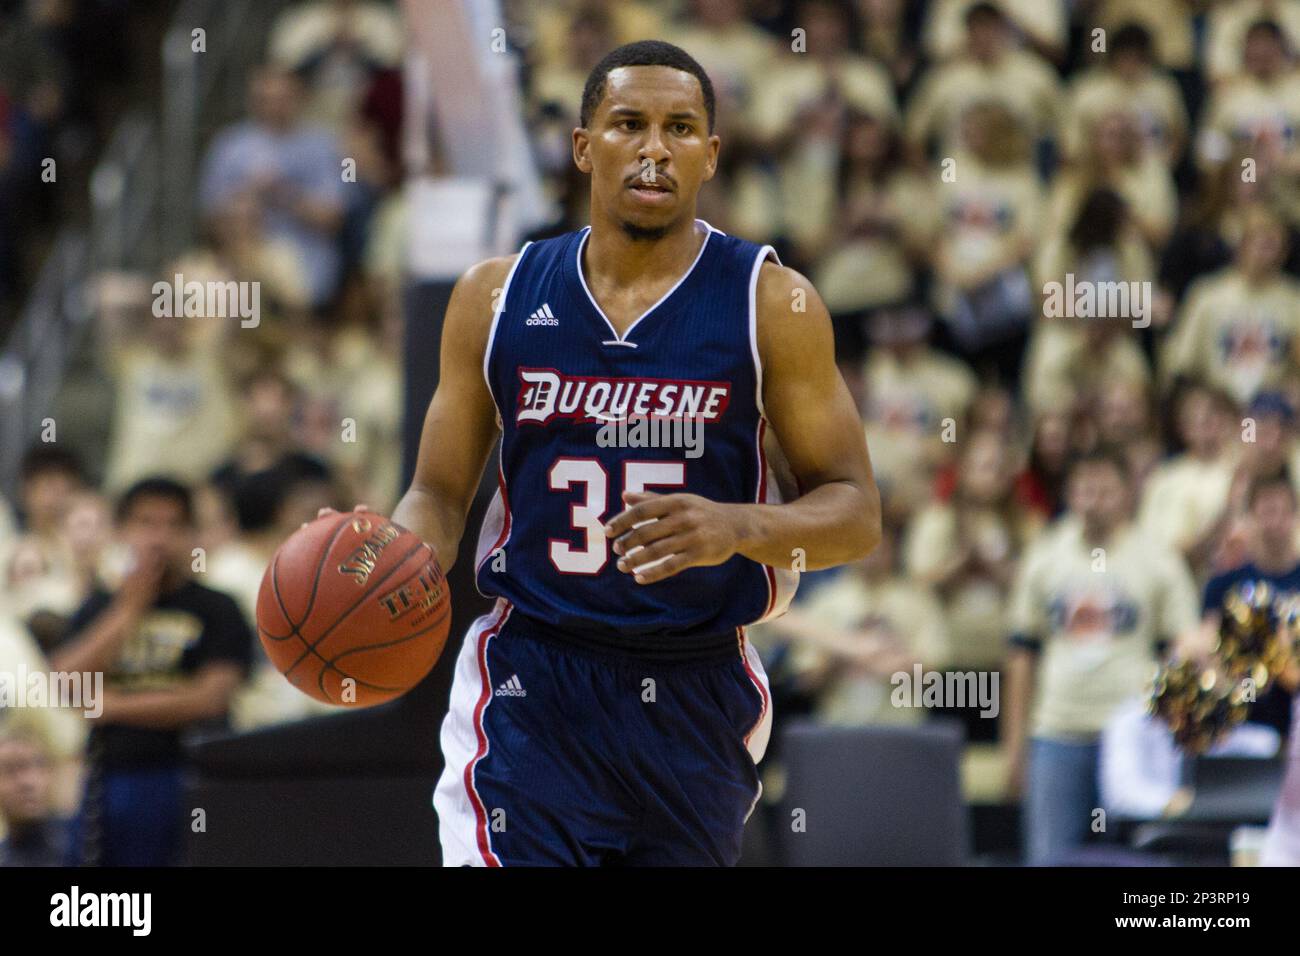 December 5 2014: Duquesne Dukes Guard Jordan Stevens (35) brings the ball  up court during the second half of the game between the Duquesne Dukes and  the Pittsburgh Panthers at the Consol